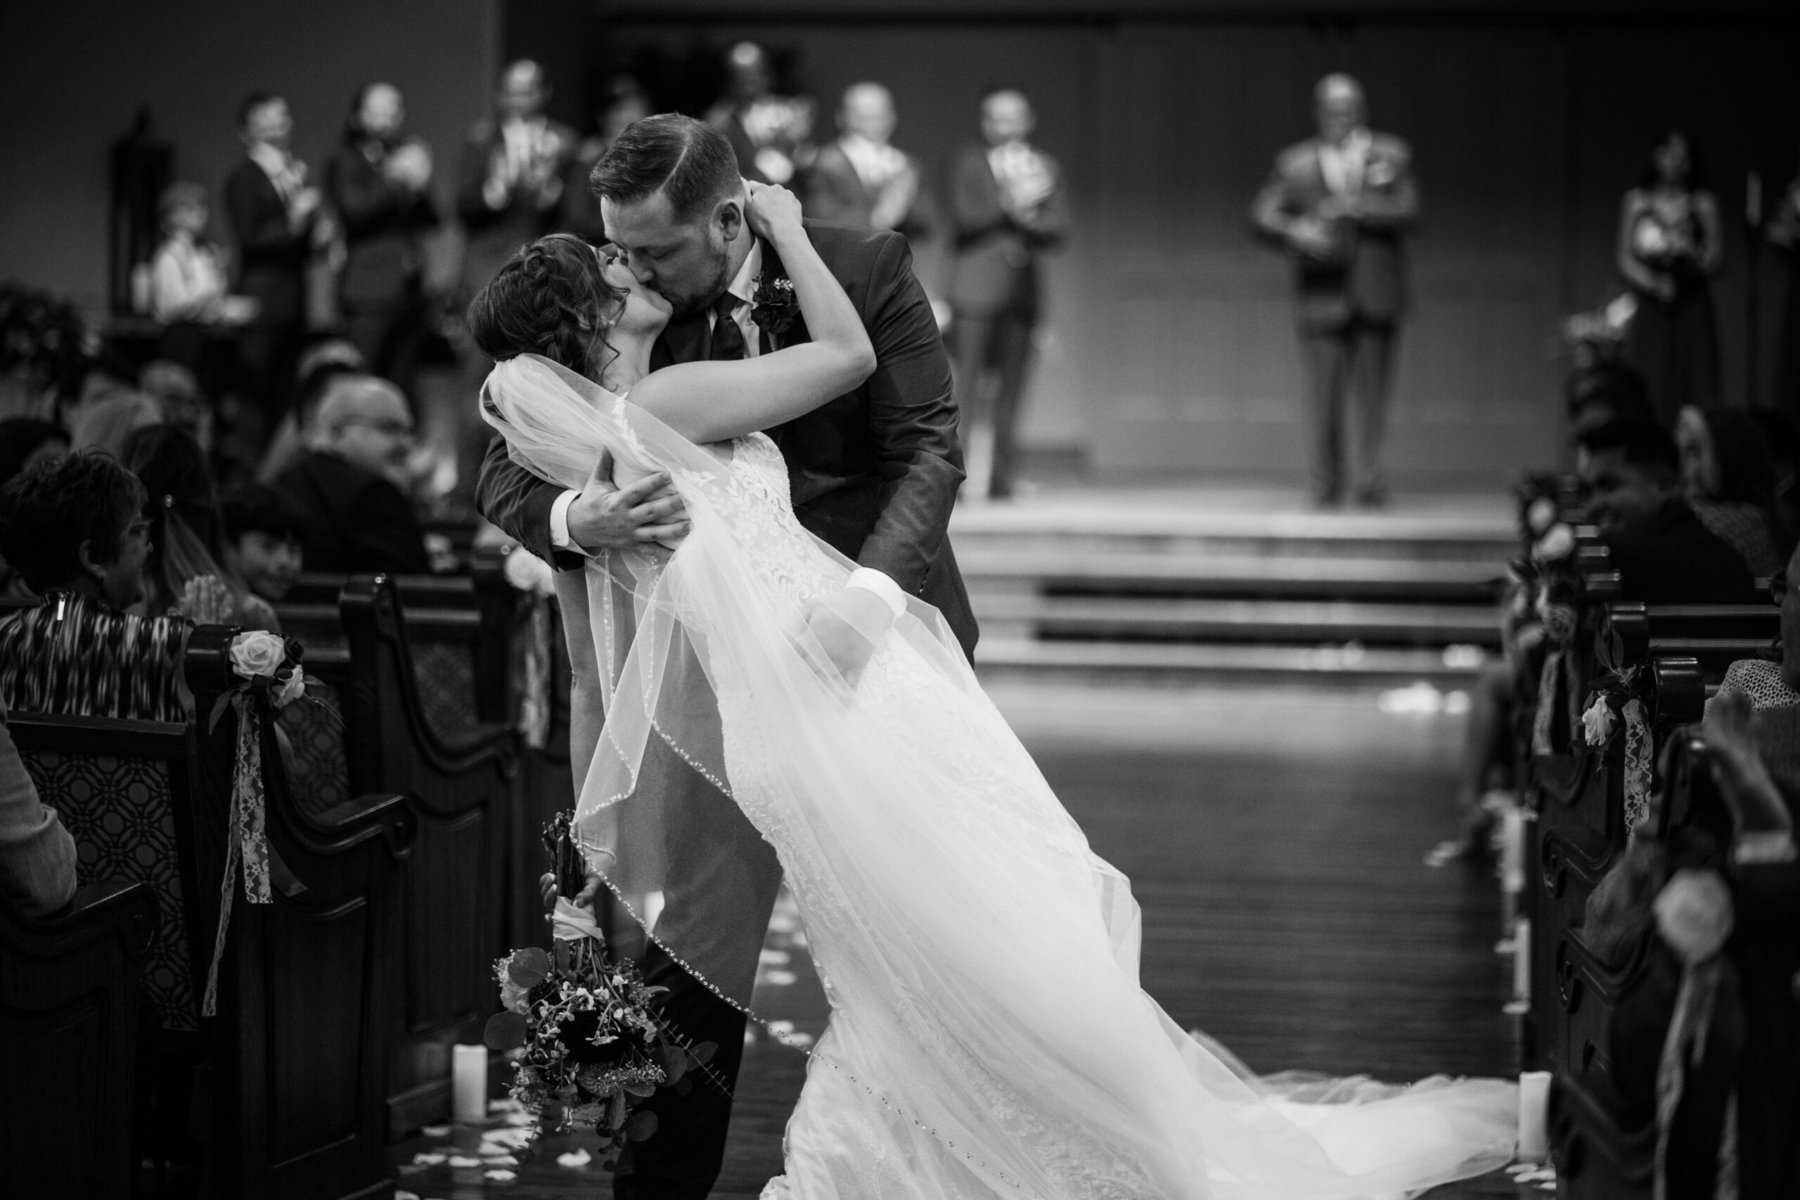 A bride and groom kiss during their wedding ceremony.